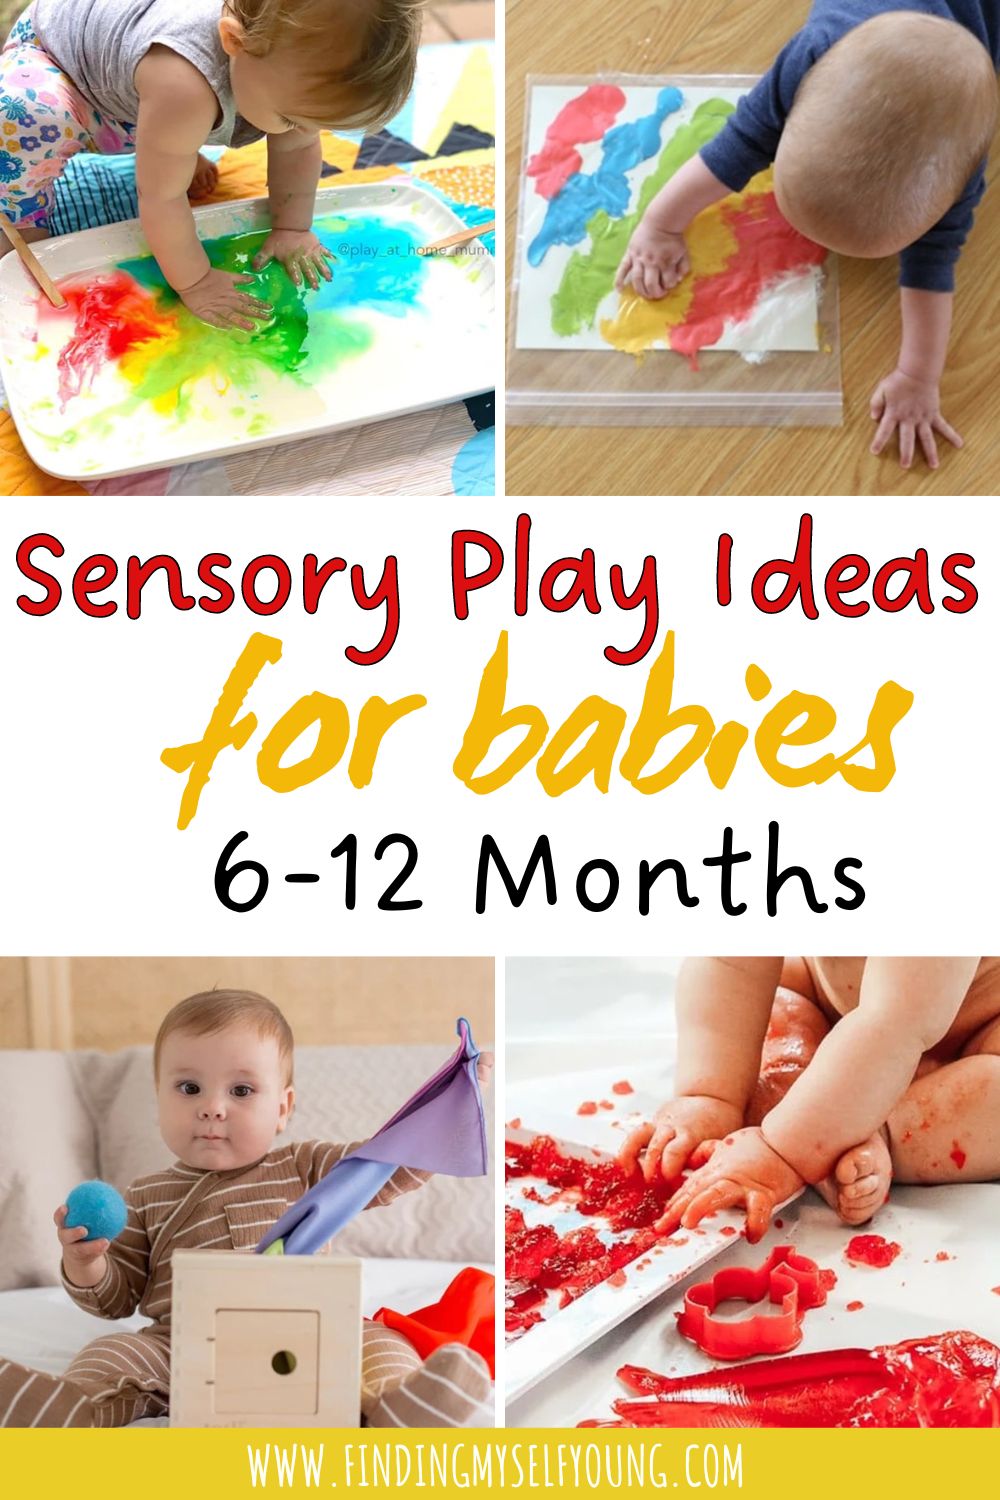 Sensory play ideas for babies 6-12 months old.